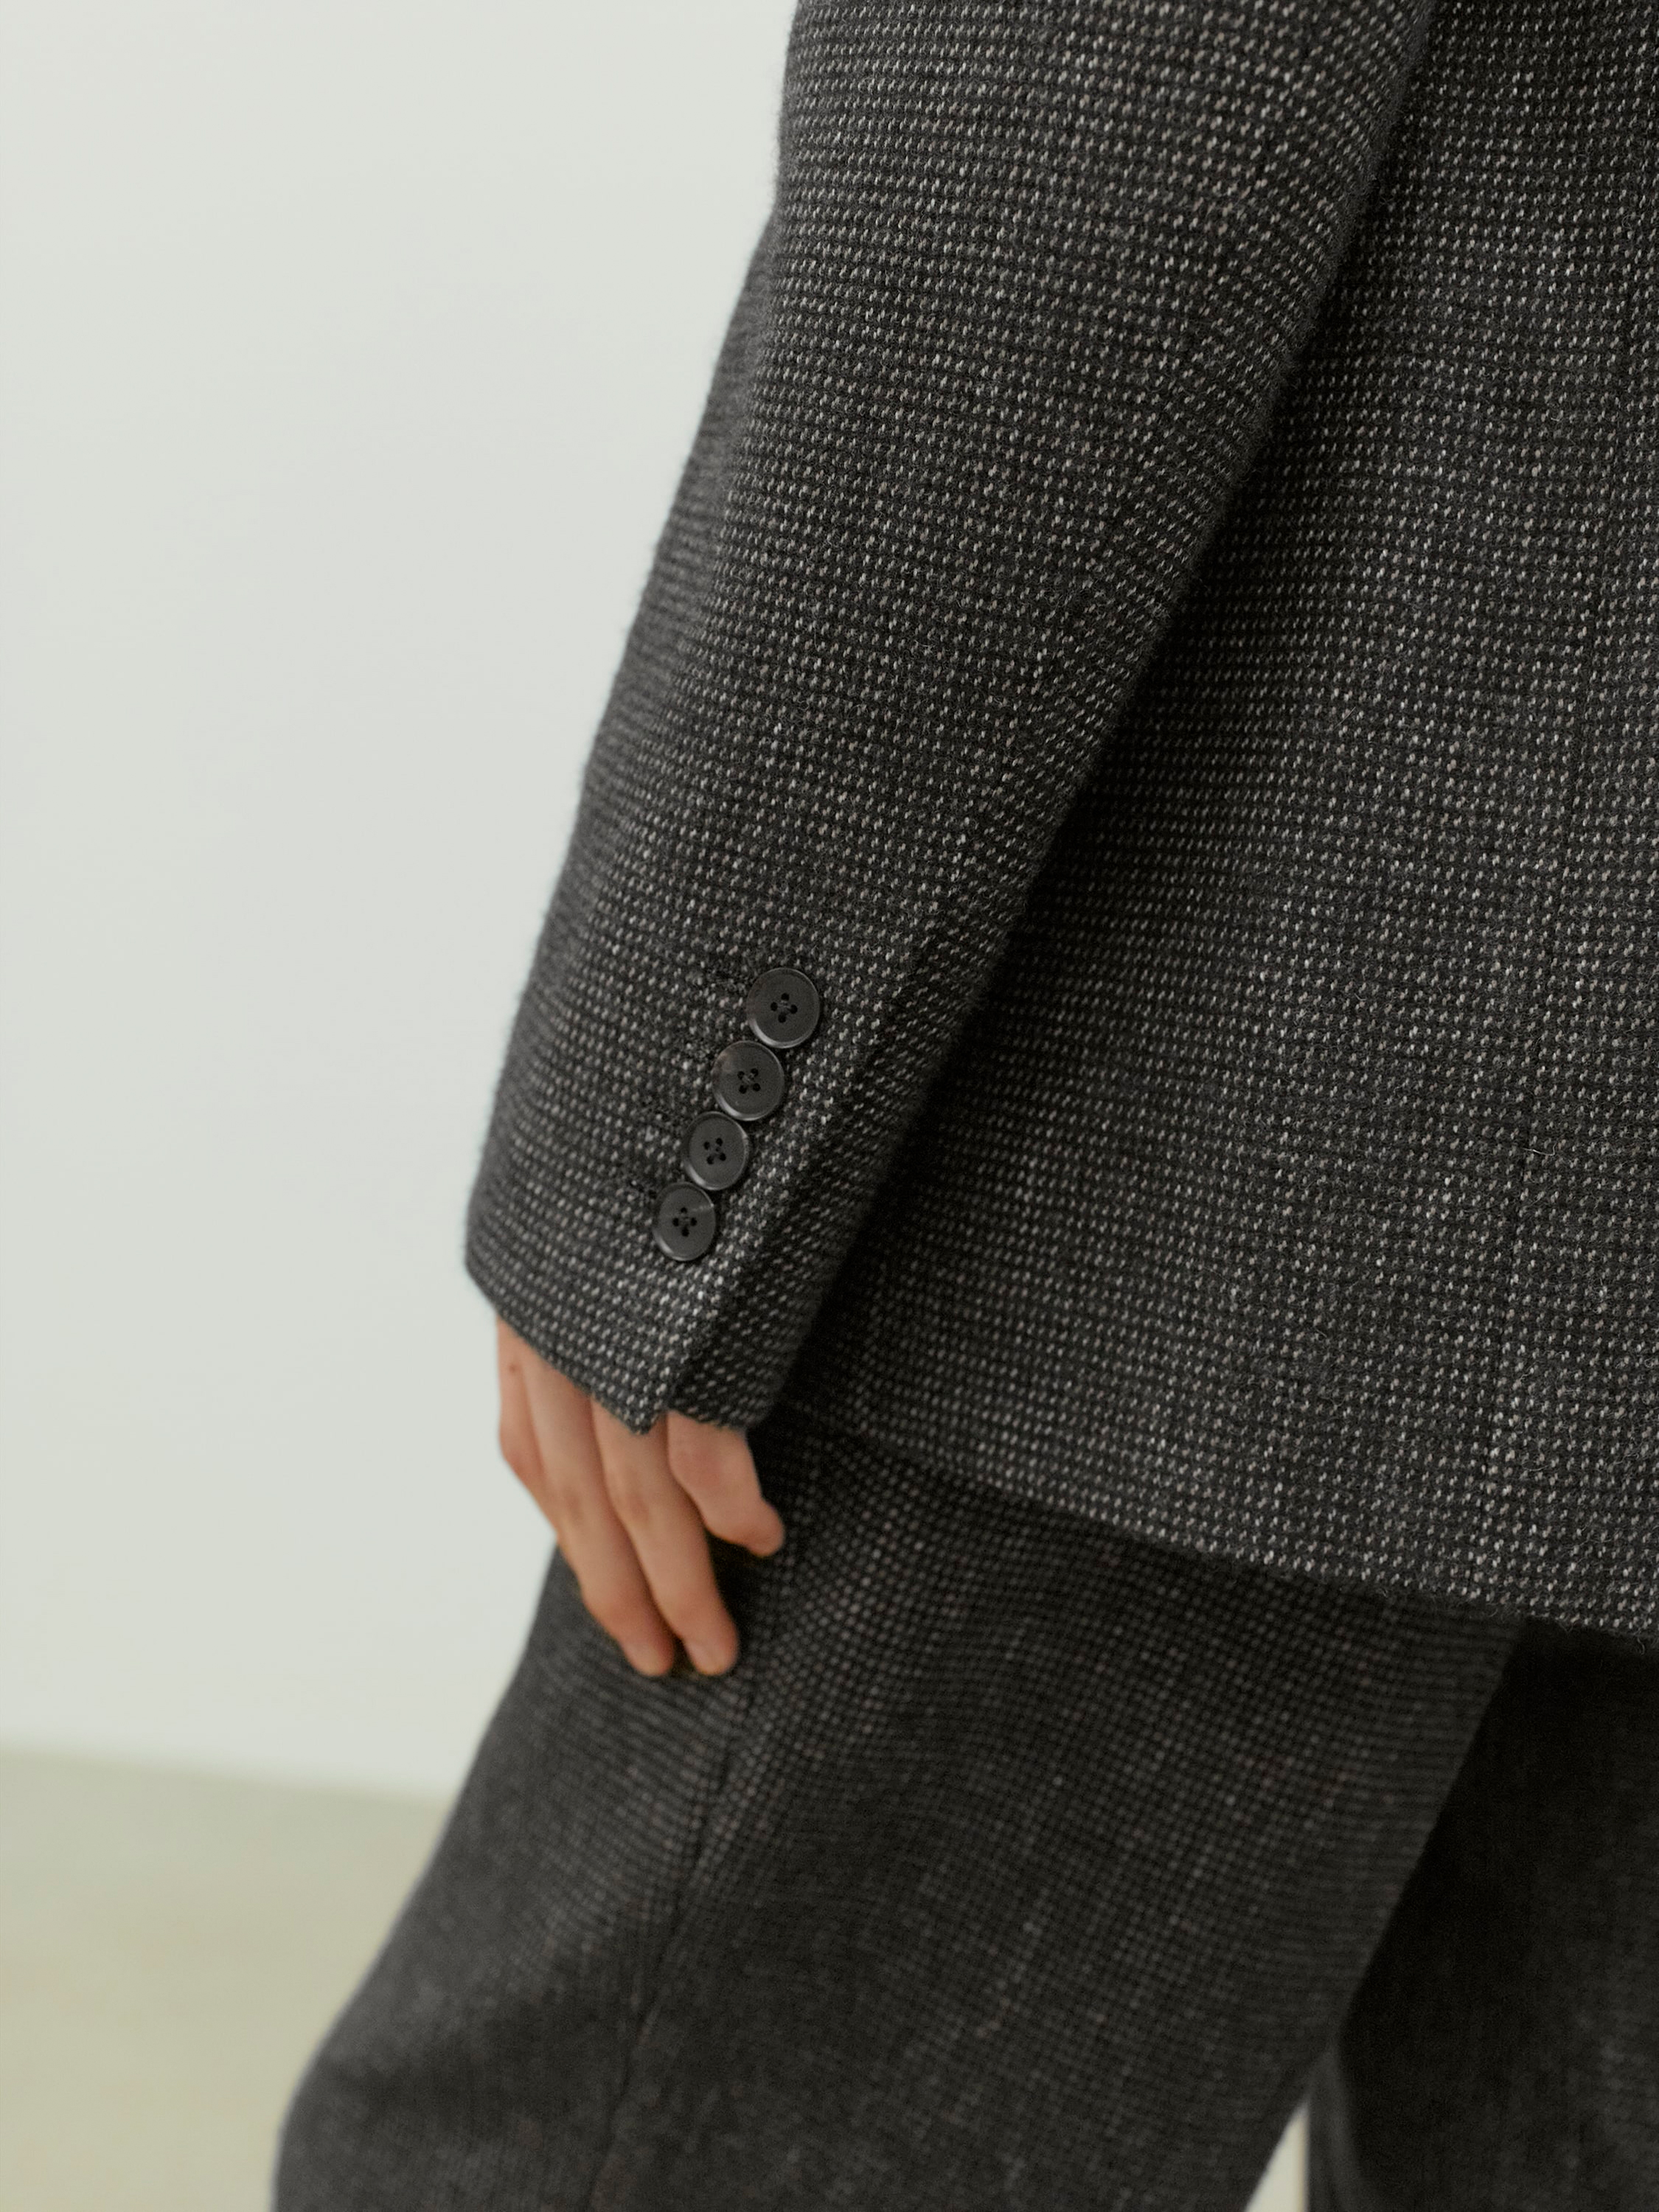 ORGANIC COTTON CASHMERE WOOL TWEED JACKET 詳細画像 TOP CHARCOAL 5